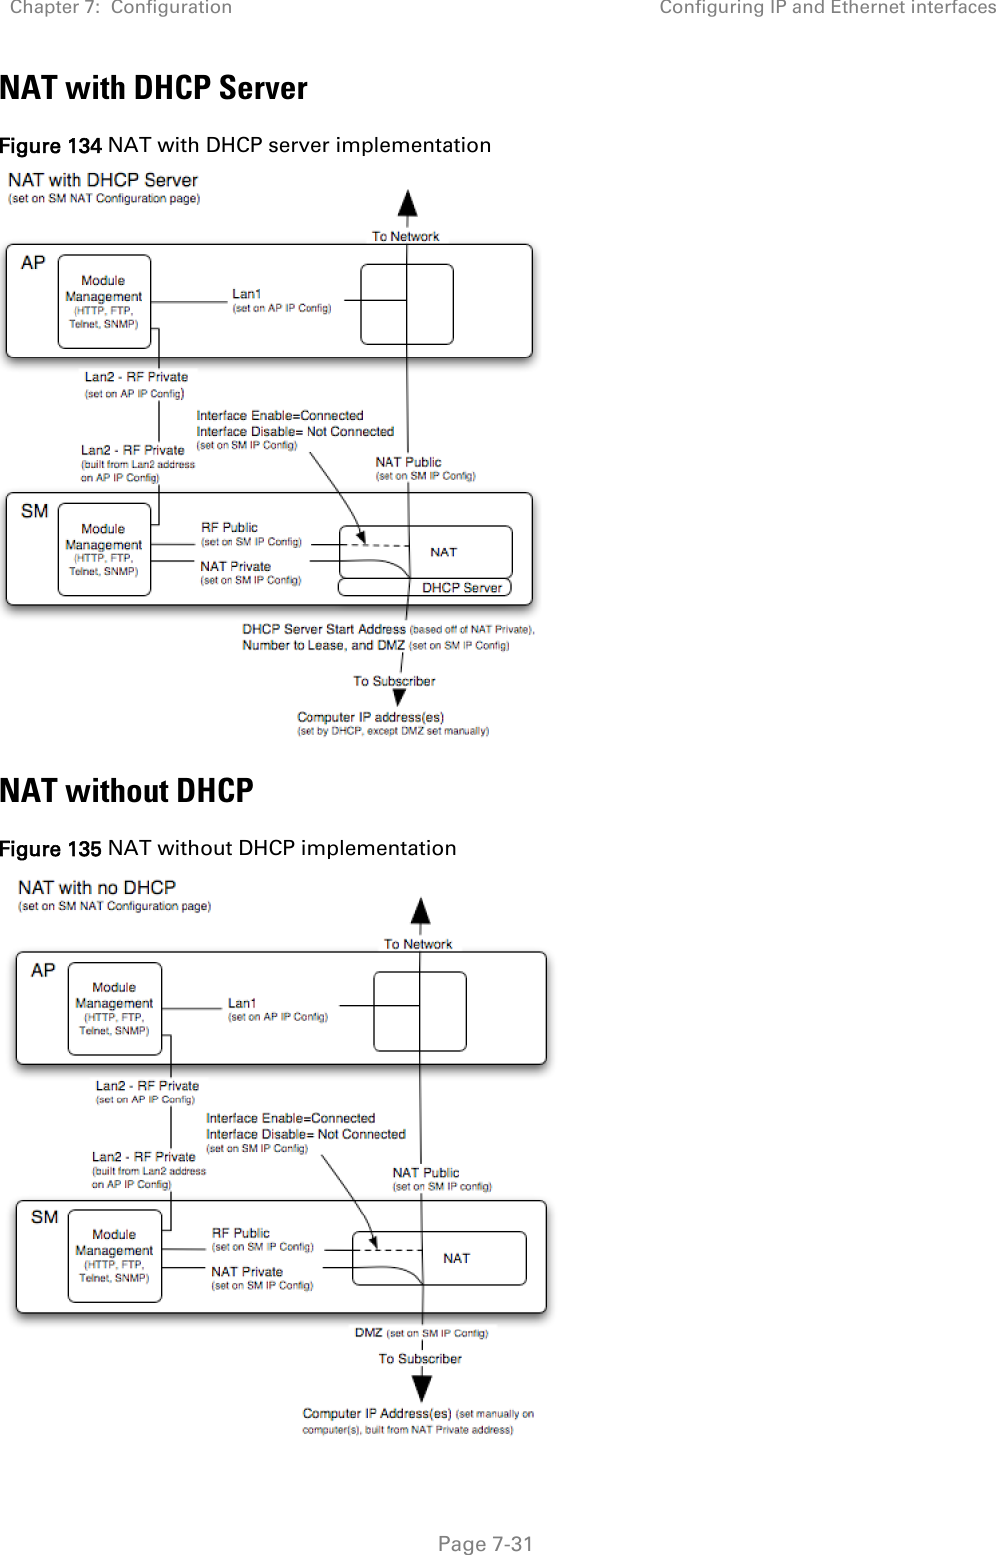 Chapter 7:  Configuration Configuring IP and Ethernet interfaces   Page 7-31 NAT with DHCP Server Figure 134 NAT with DHCP server implementation  NAT without DHCP Figure 135 NAT without DHCP implementation  